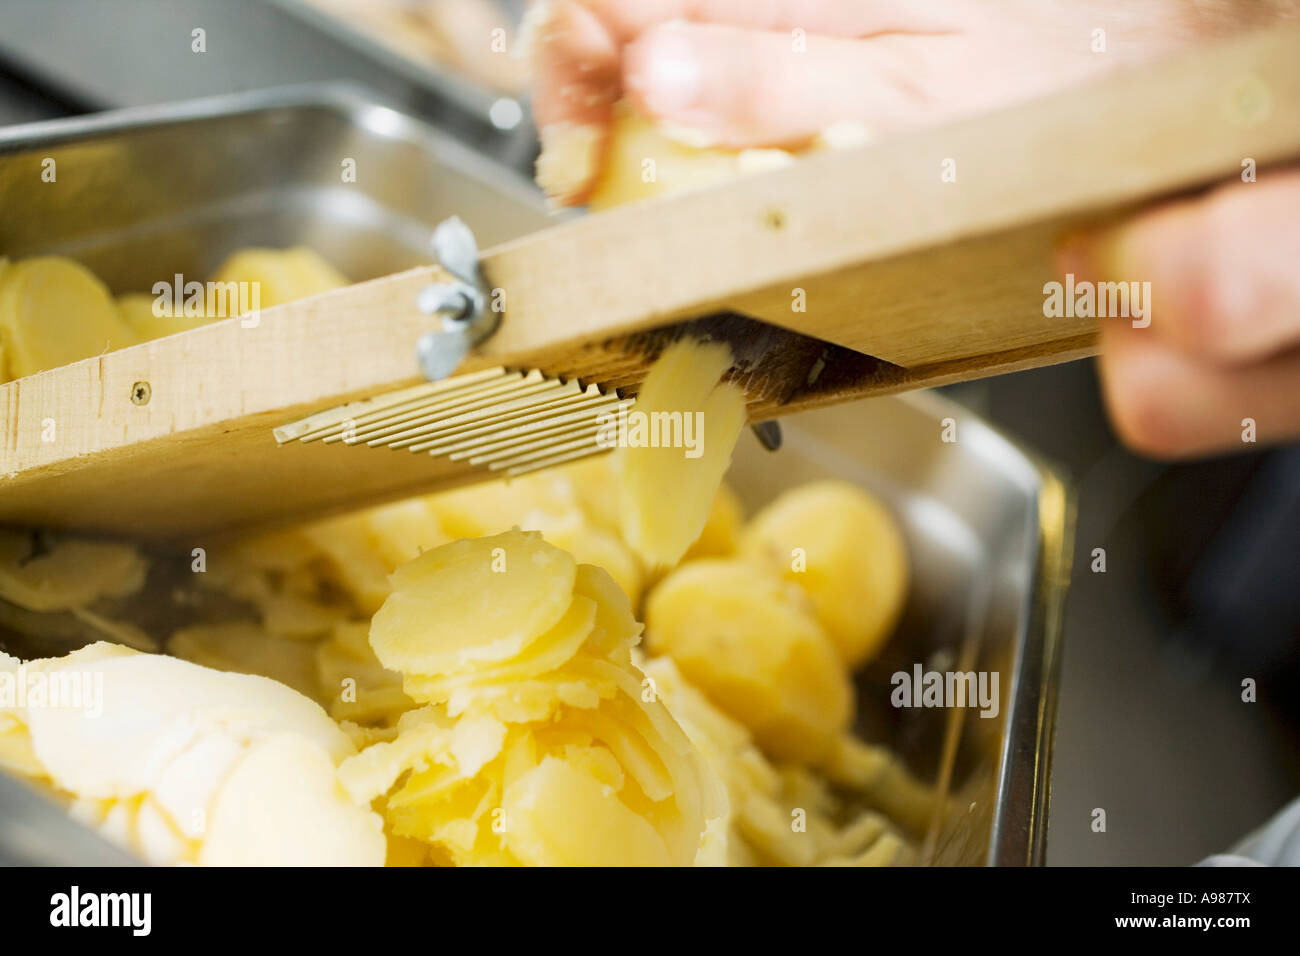 https://c8.alamy.com/comp/A987TX/slicer-cooked-potatoes-with-vegetable-slicer-foodcollection-A987TX.jpg